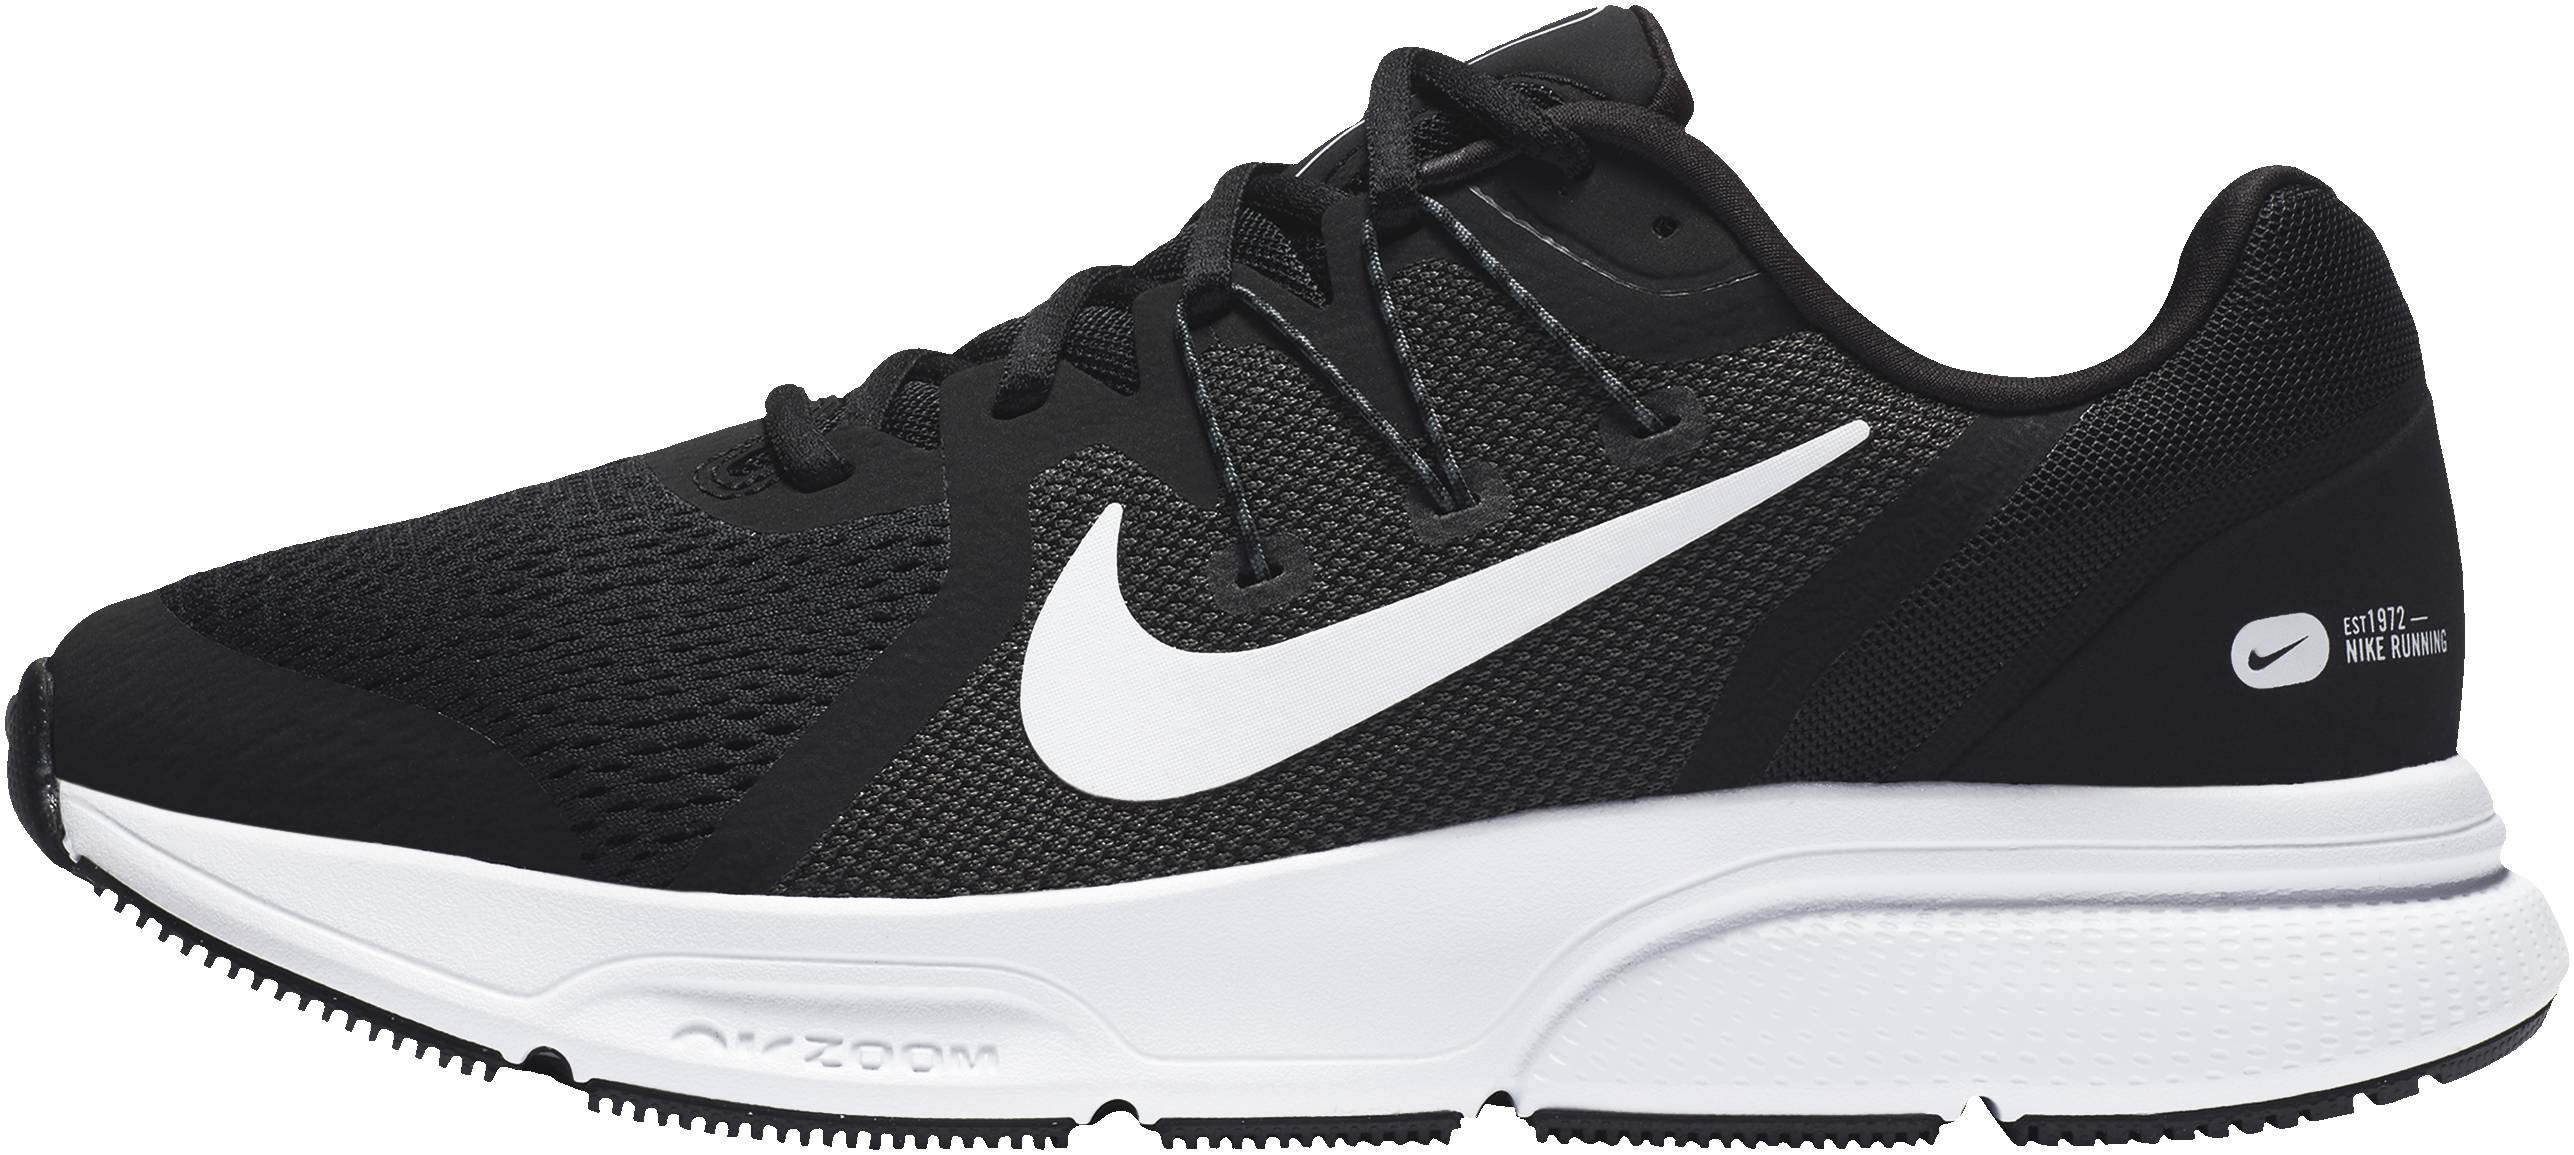 Nationwide Oppressor medalist Nike Zoom Span 3 Review 2023, Facts, Deals ($67) | RunRepeat